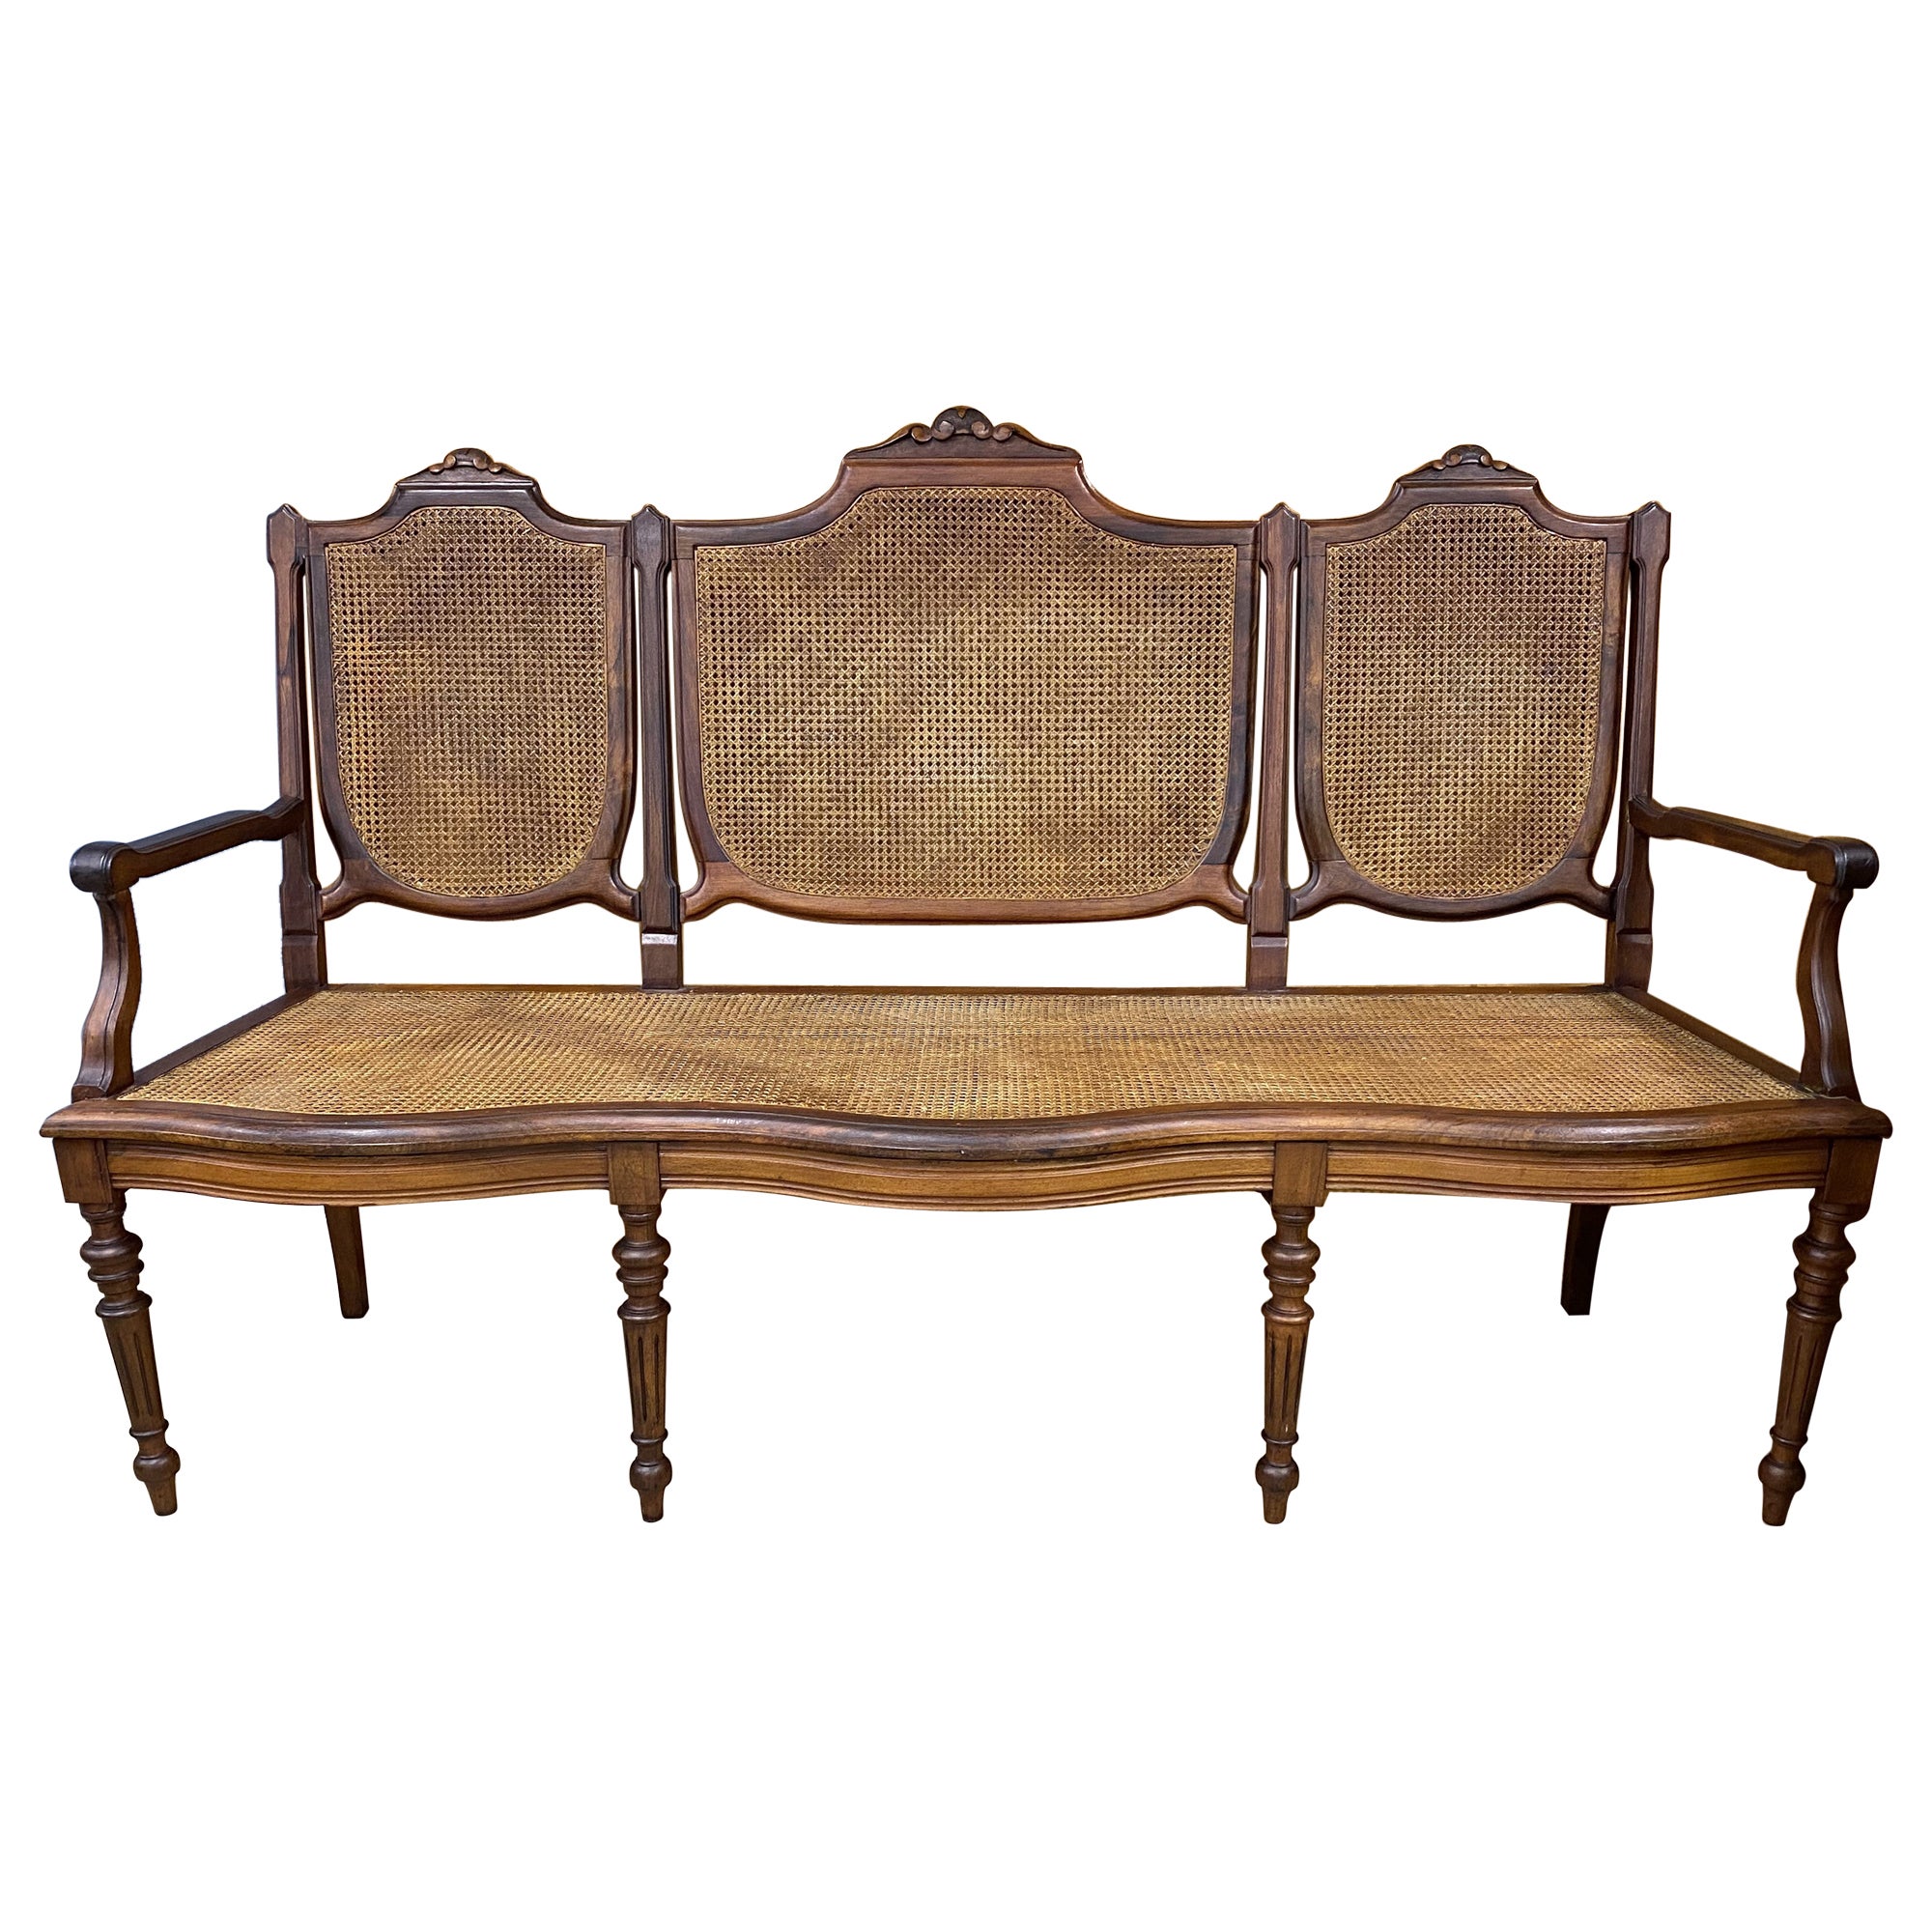 19th c Brazilian Hardwood Settee with Caned Seat and Back For Sale